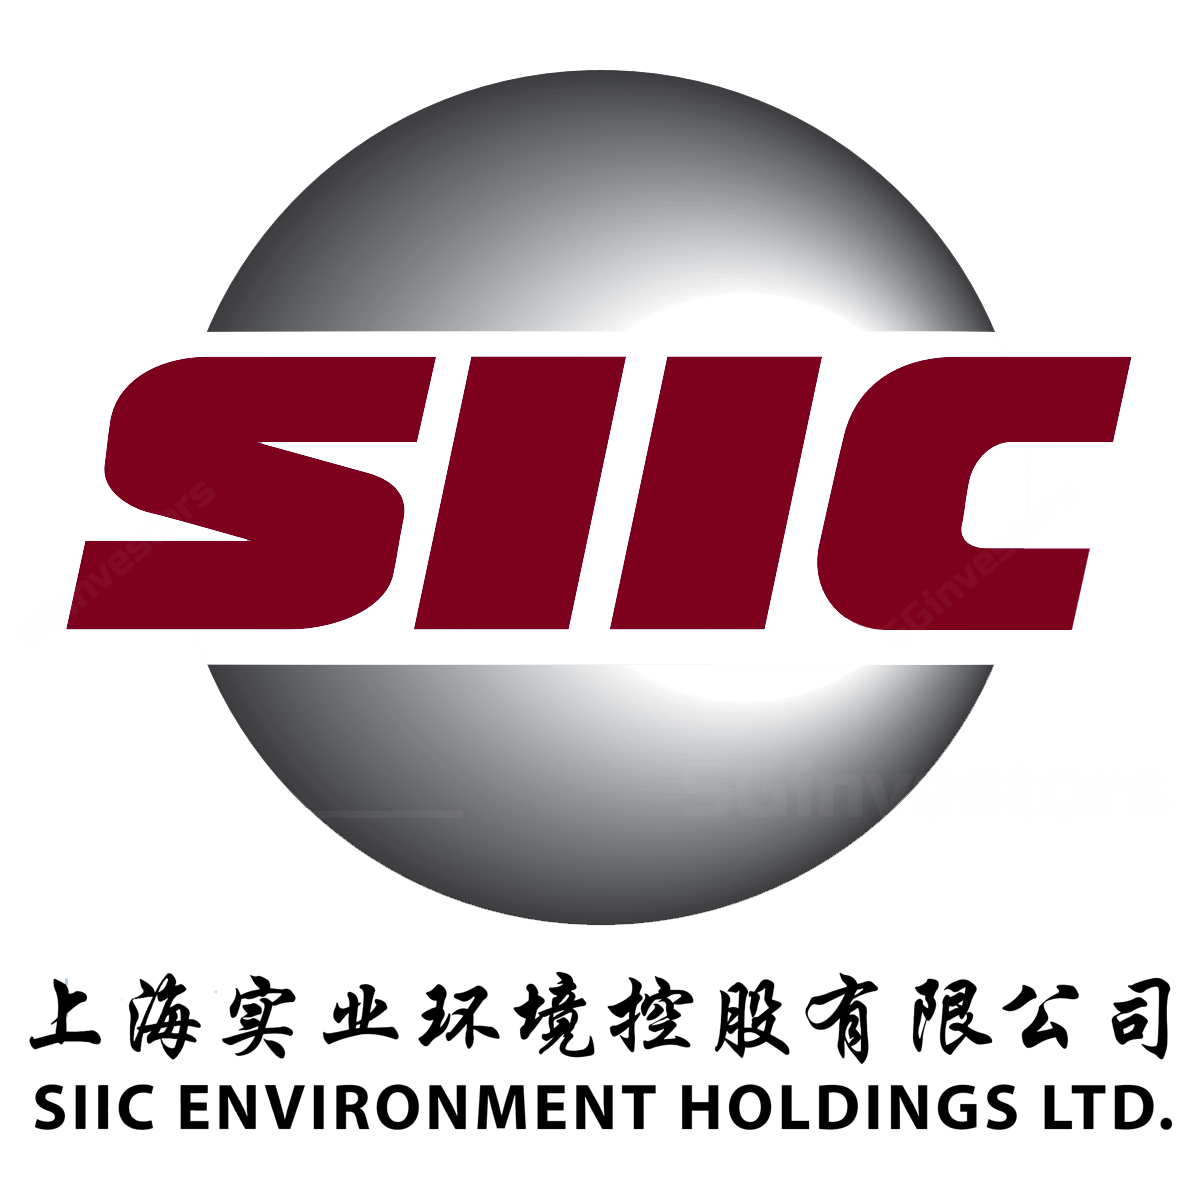 SIIC Environment Holdings - RHB Invest 2017-11-10: Another Disappointing Quarter